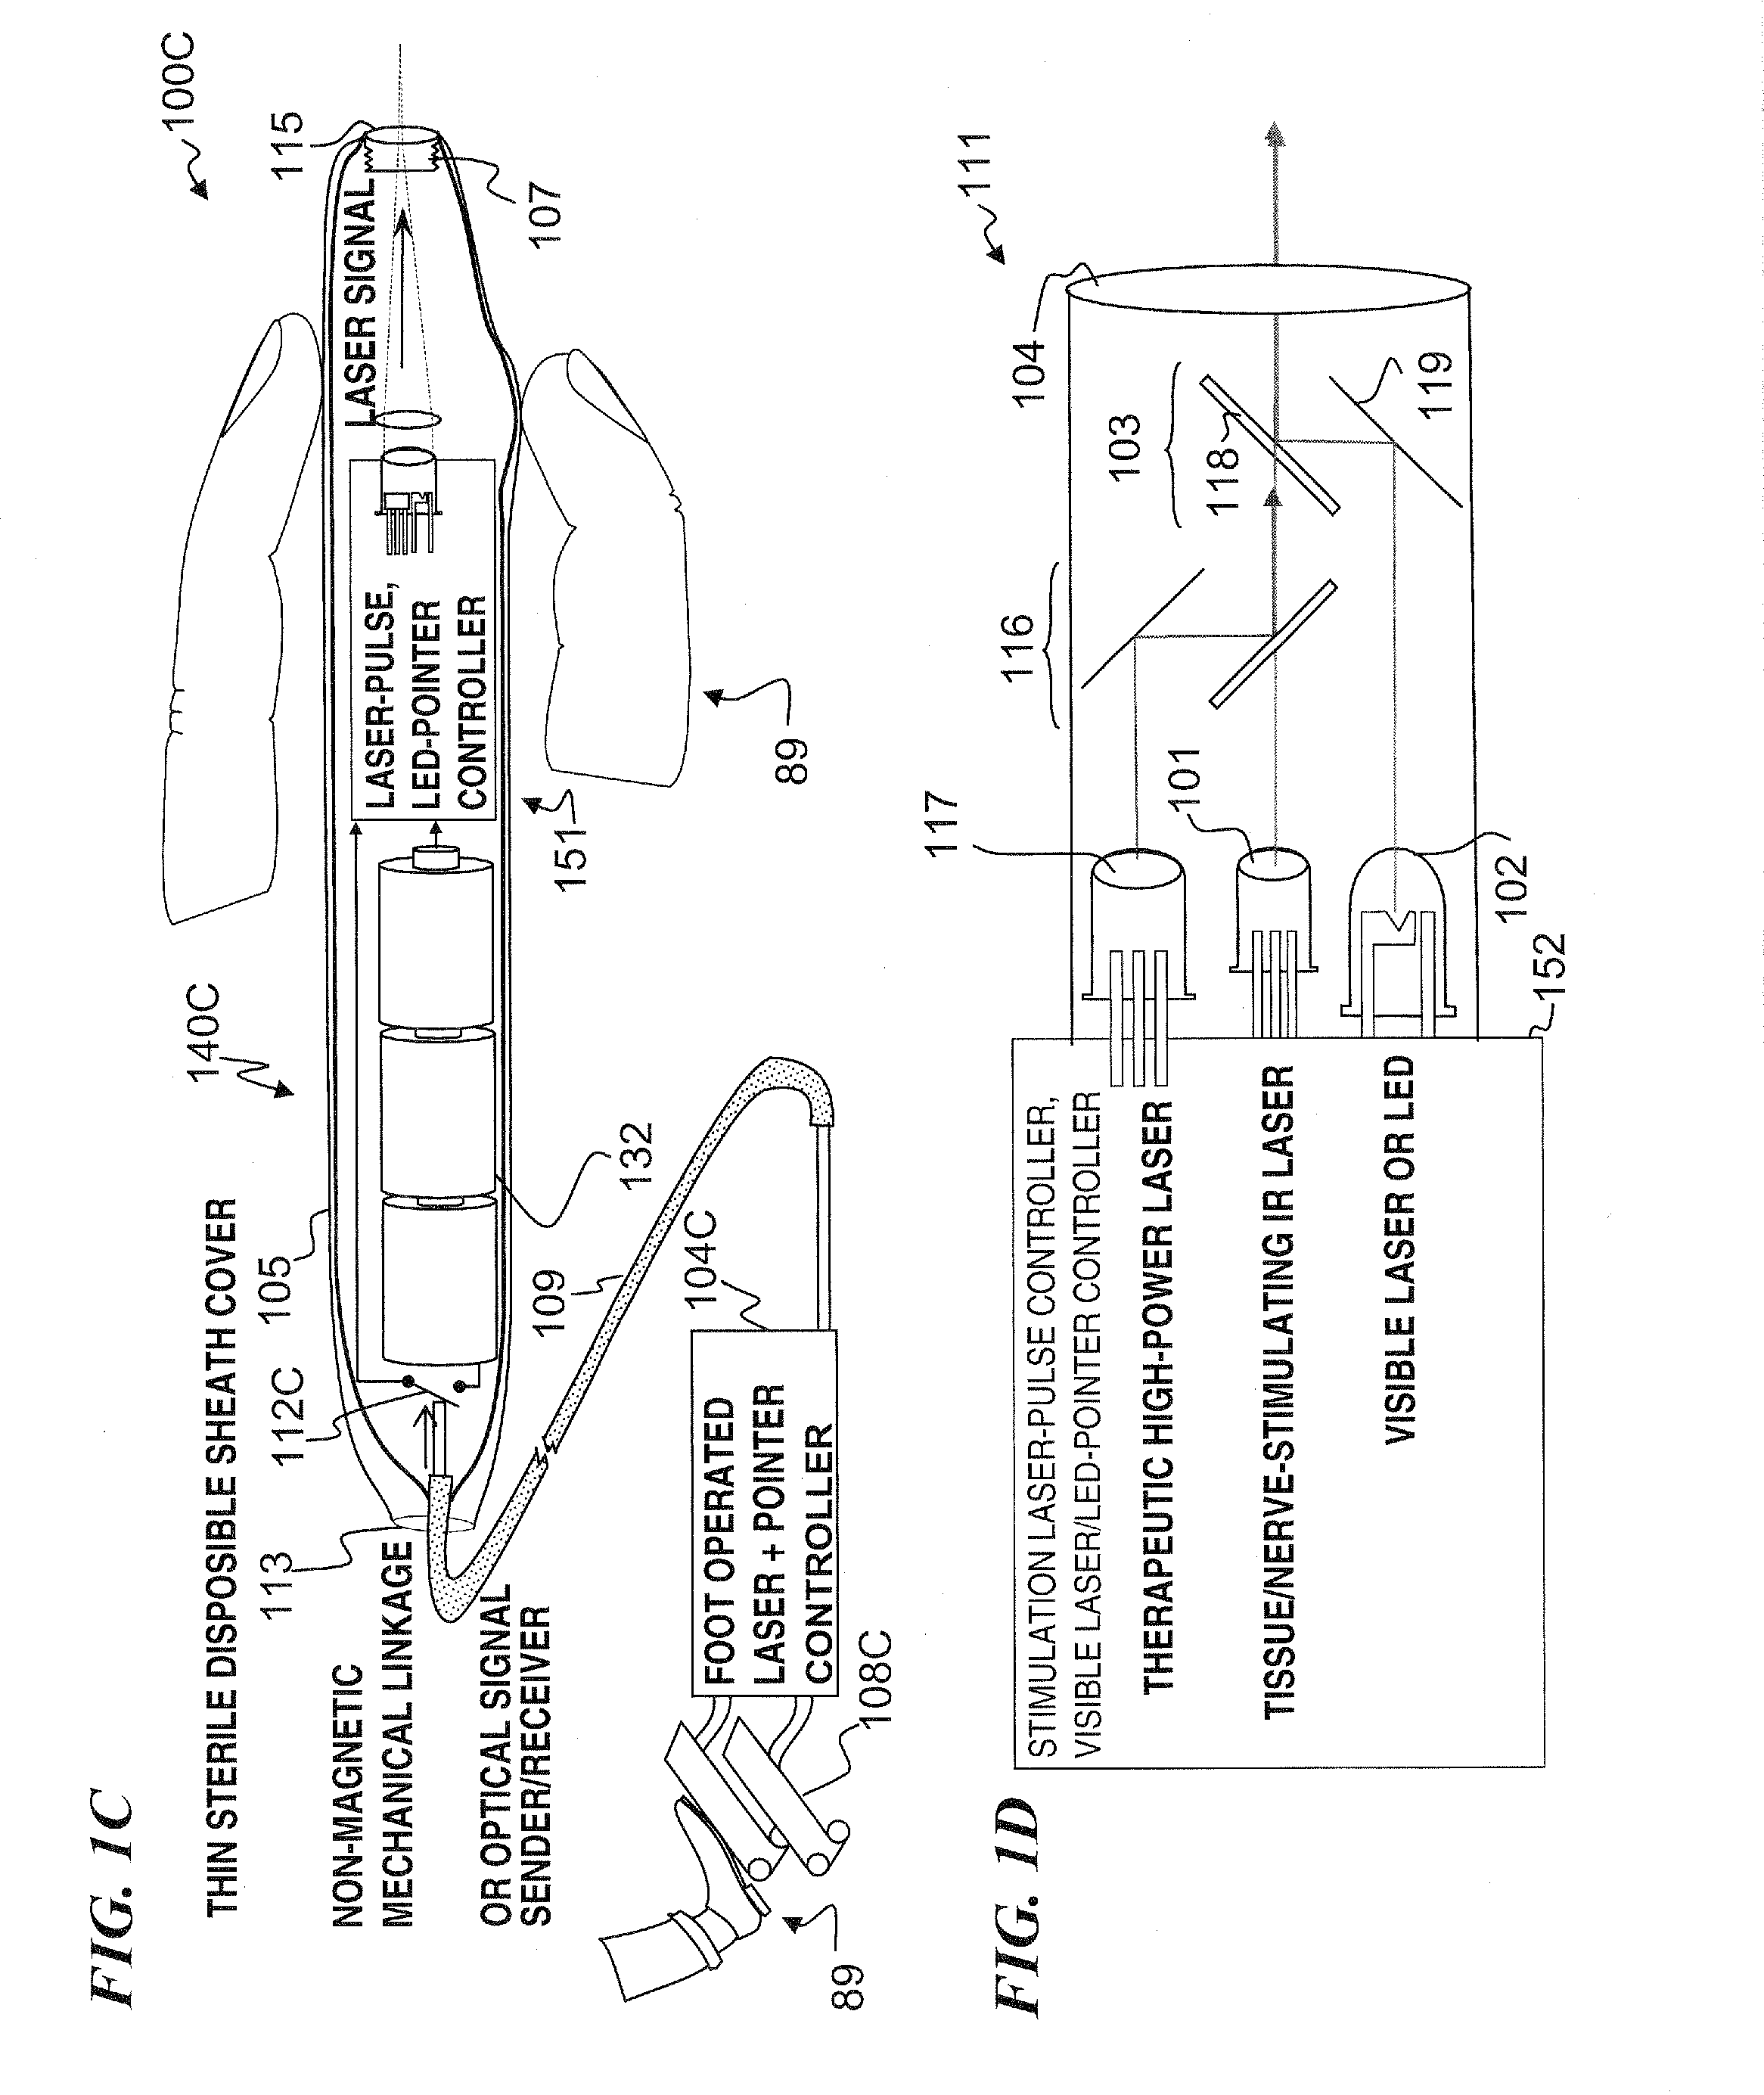 Apparatus and method for stimulation of nerves and automated control of surgical instruments